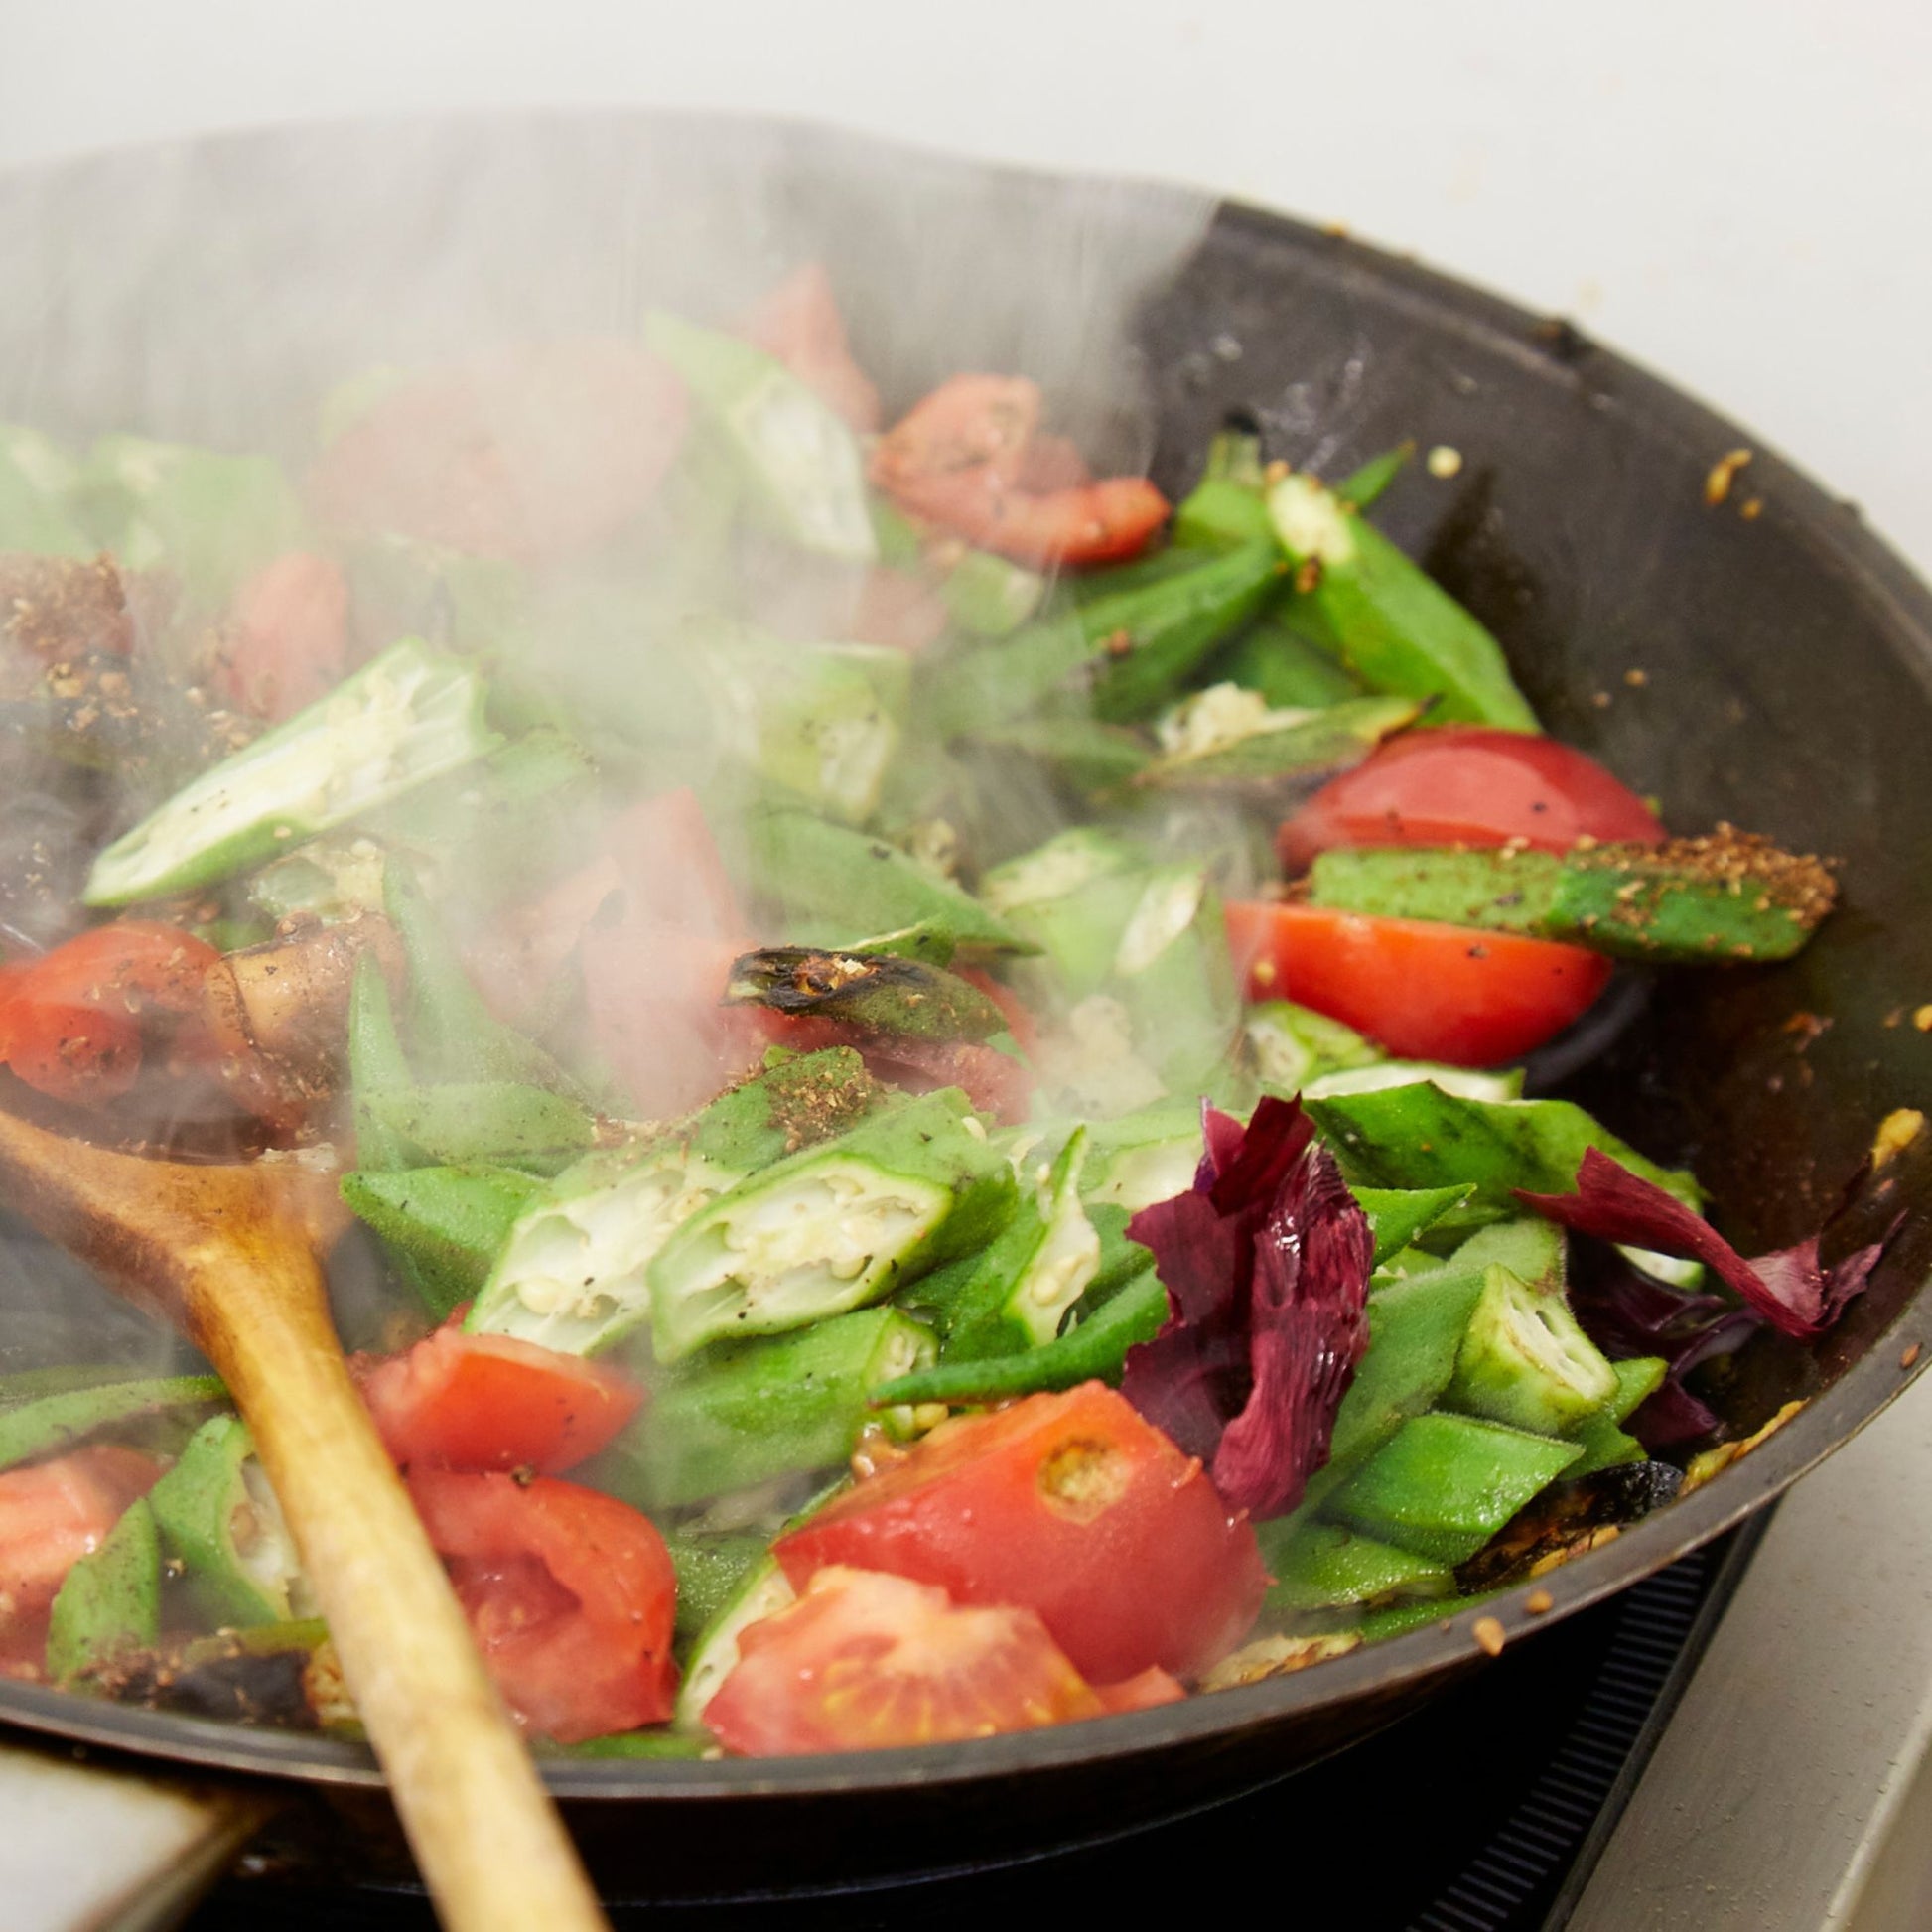 Vegetables cooking in a pan